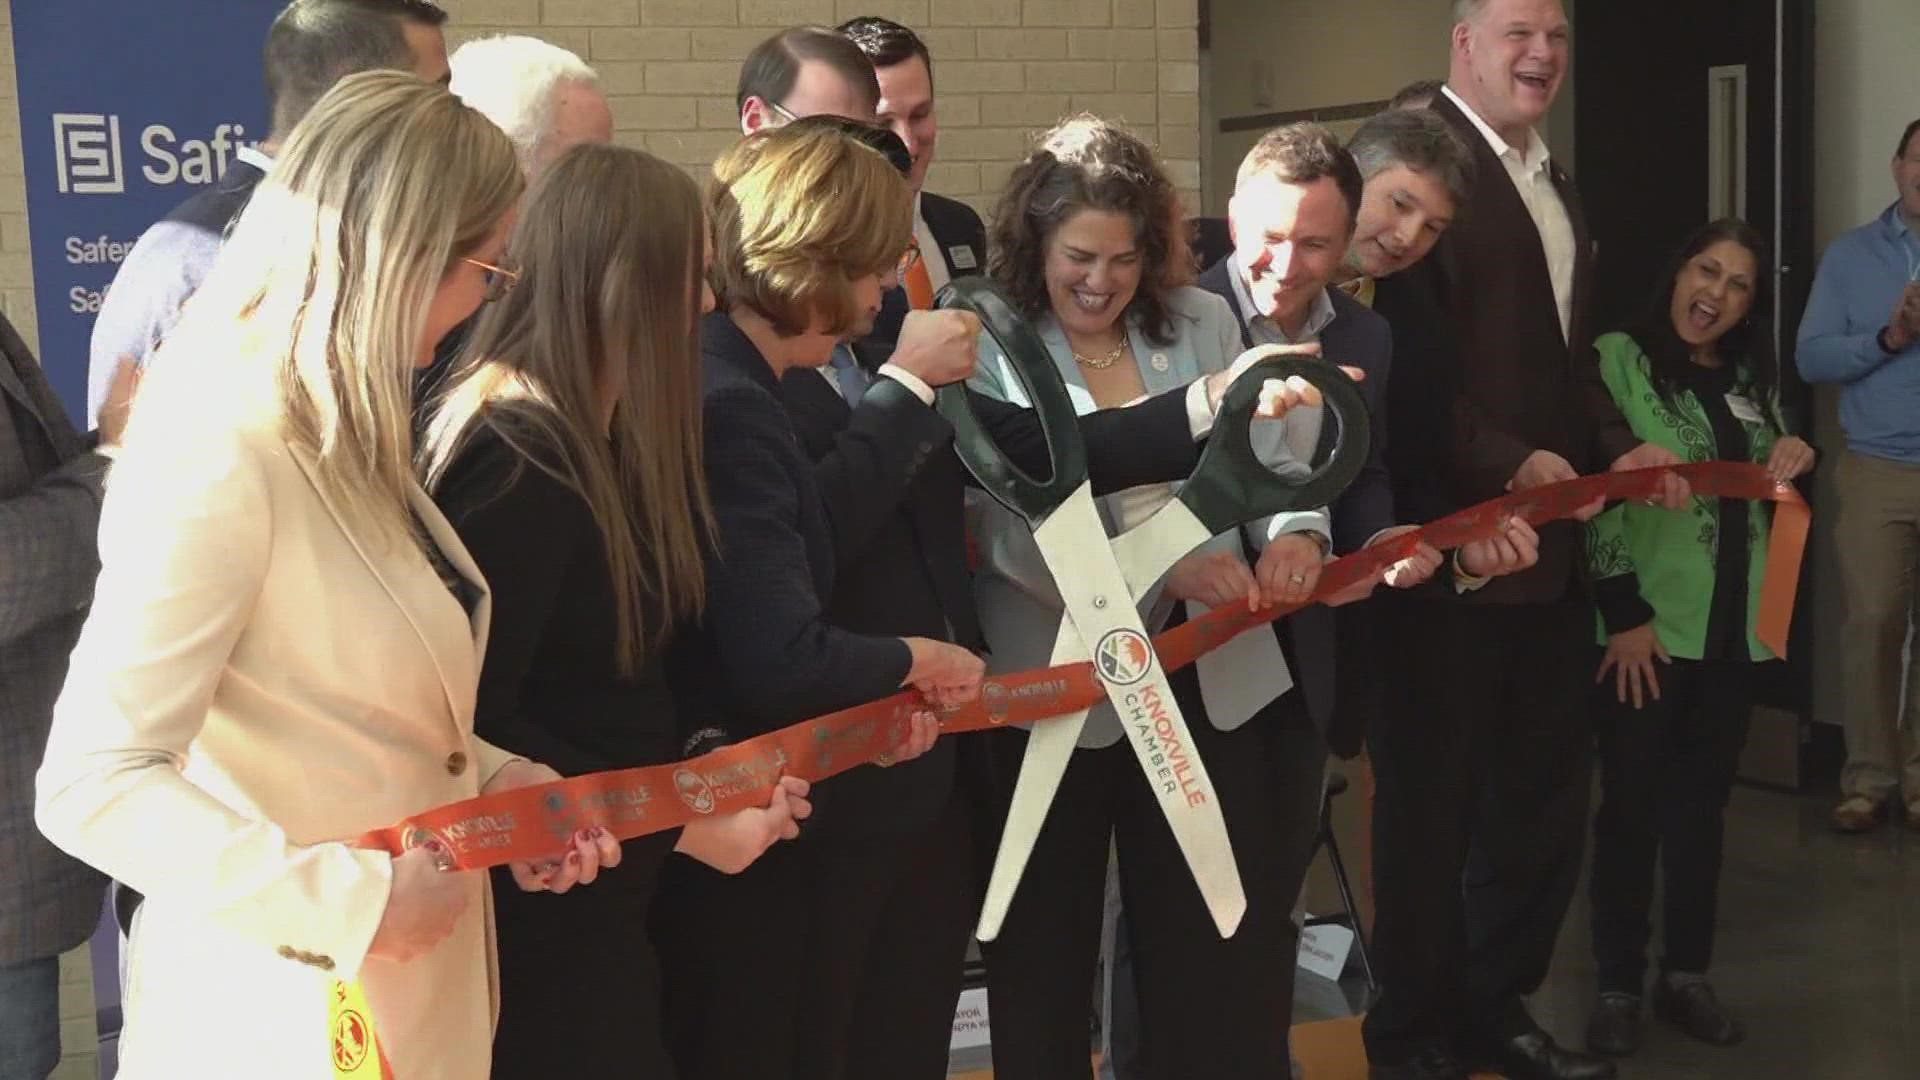 Safire Technology Group said they were expanding to Knoxville by opening a new laboratory at the University of Tennessee Spark Innovation Center.